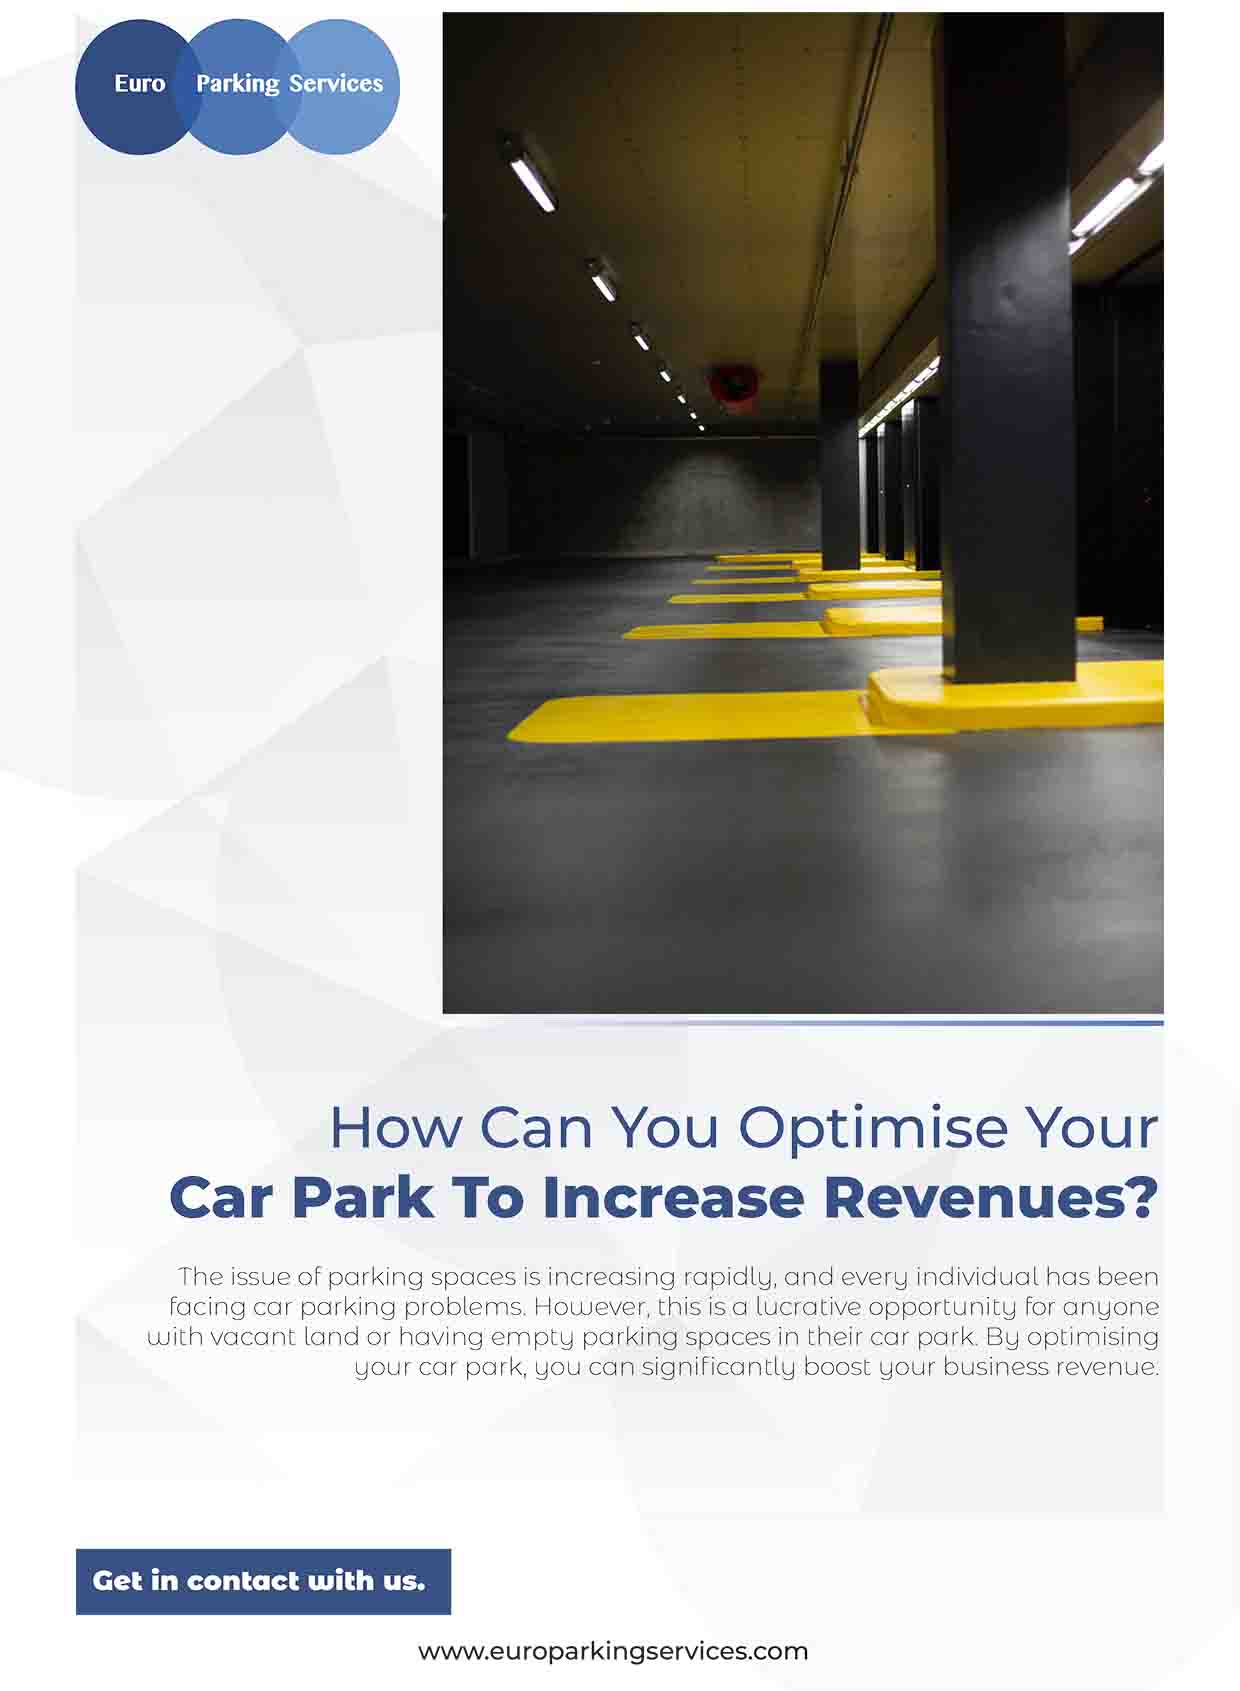 How Can You Optimise Your Car Park To Increase Revenues